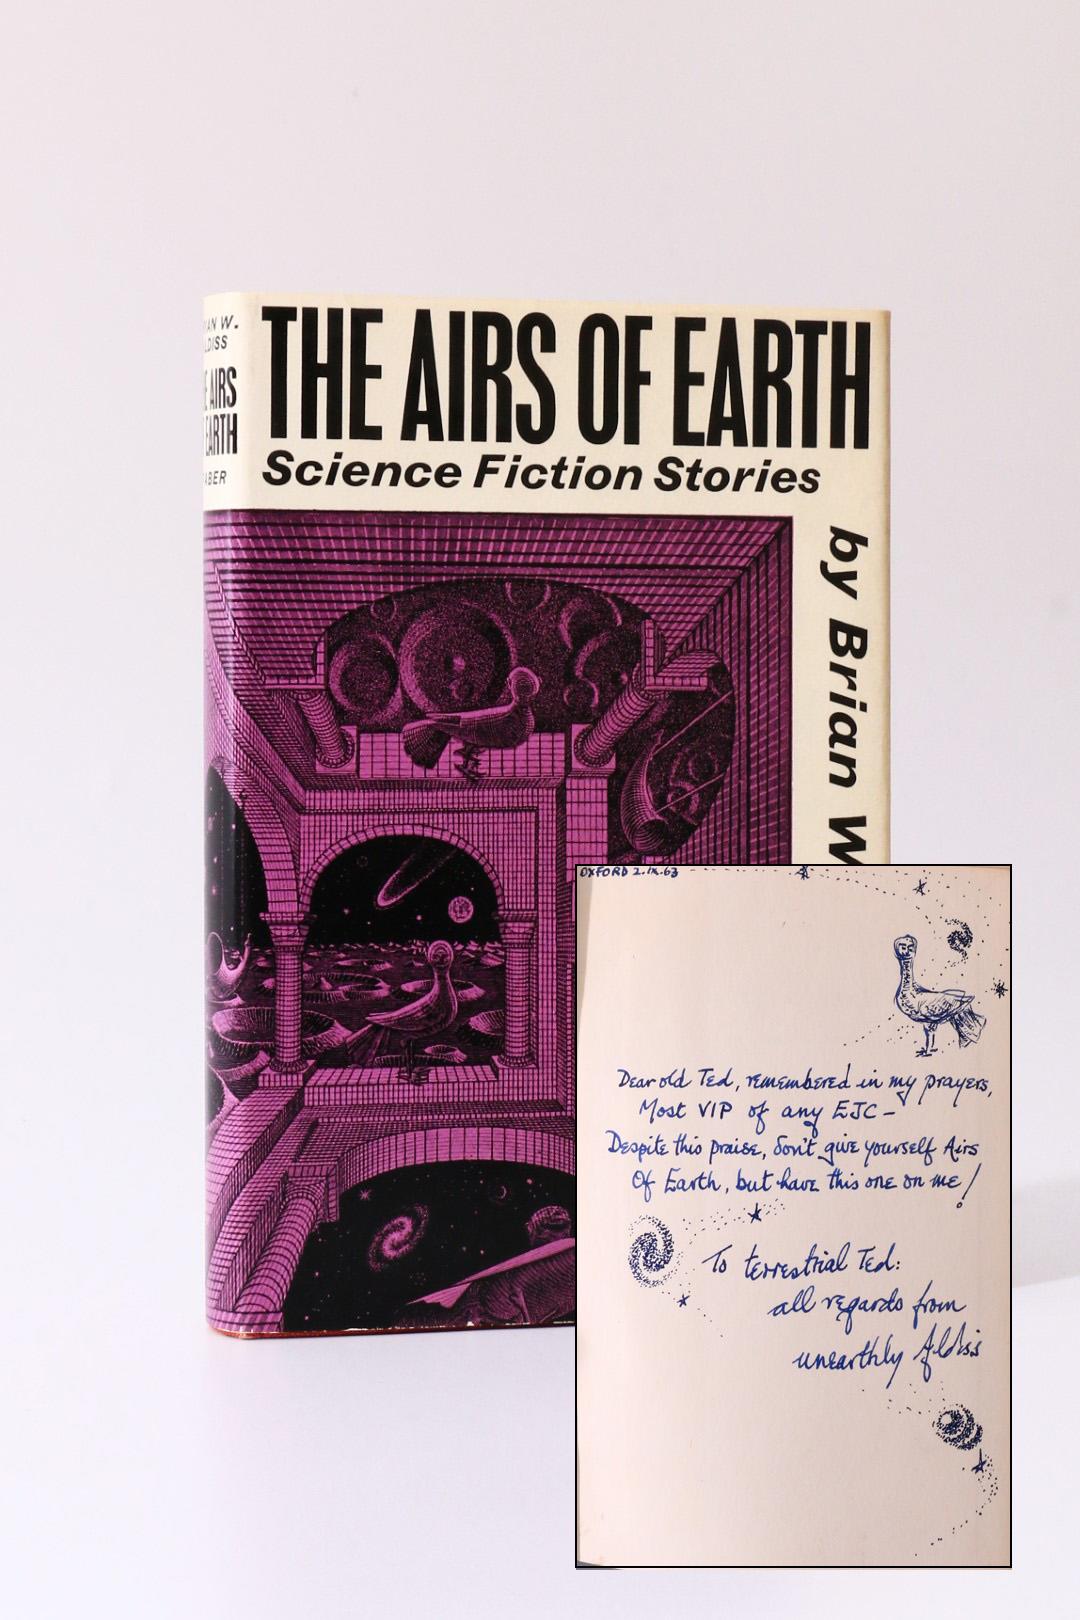 Brian W. Aldiss - The Airs of Earth - An Association Copy - Faber & Faber, 1964, Signed First Edition.